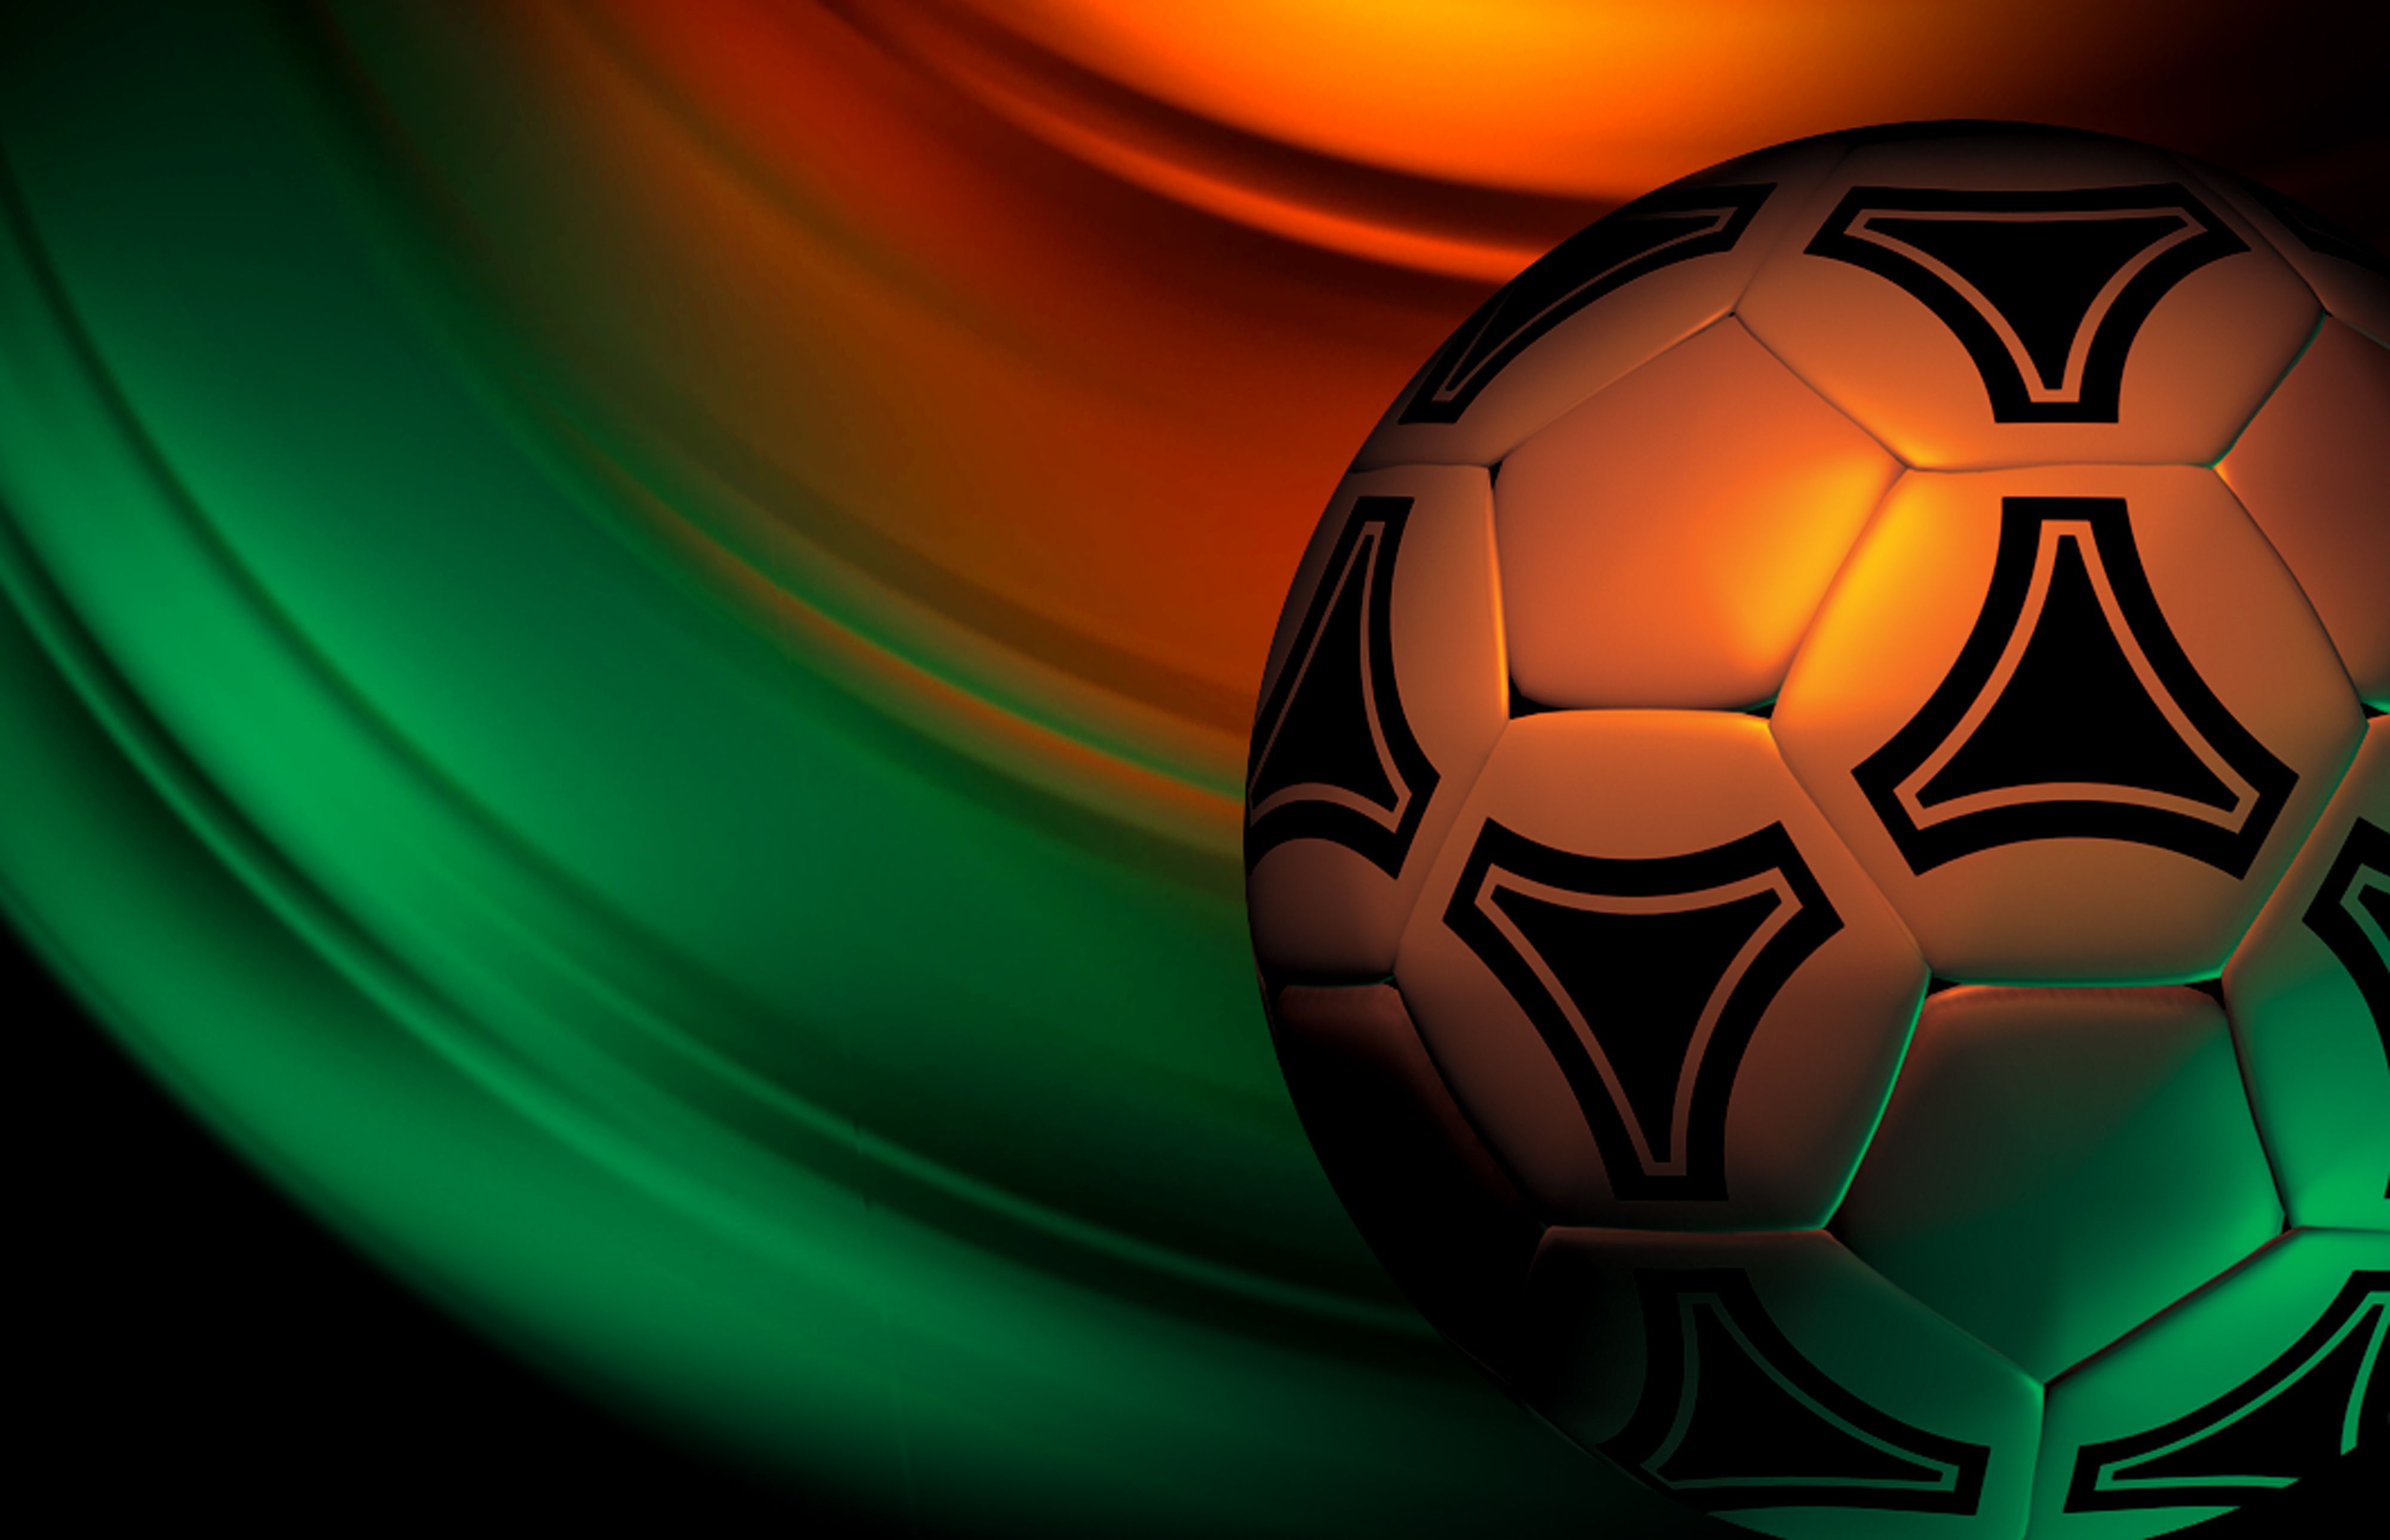 Background With Soccer Ball. 3D Render. Background With Soccer Ball. 3D Render. is an HD desktop wallpaper posted in our free im. Soccer, Soccer ball, Wallpaper